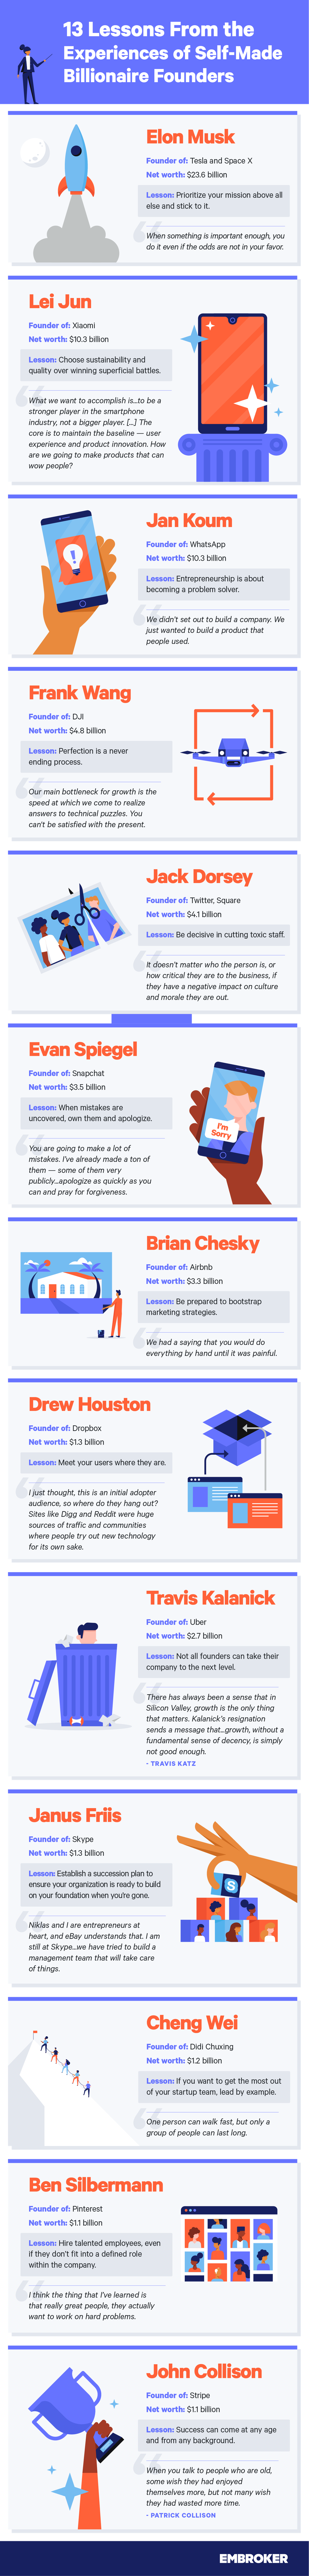 13 lessons learned from the experiences of self-made billionaires to overcome executive challenges infographic